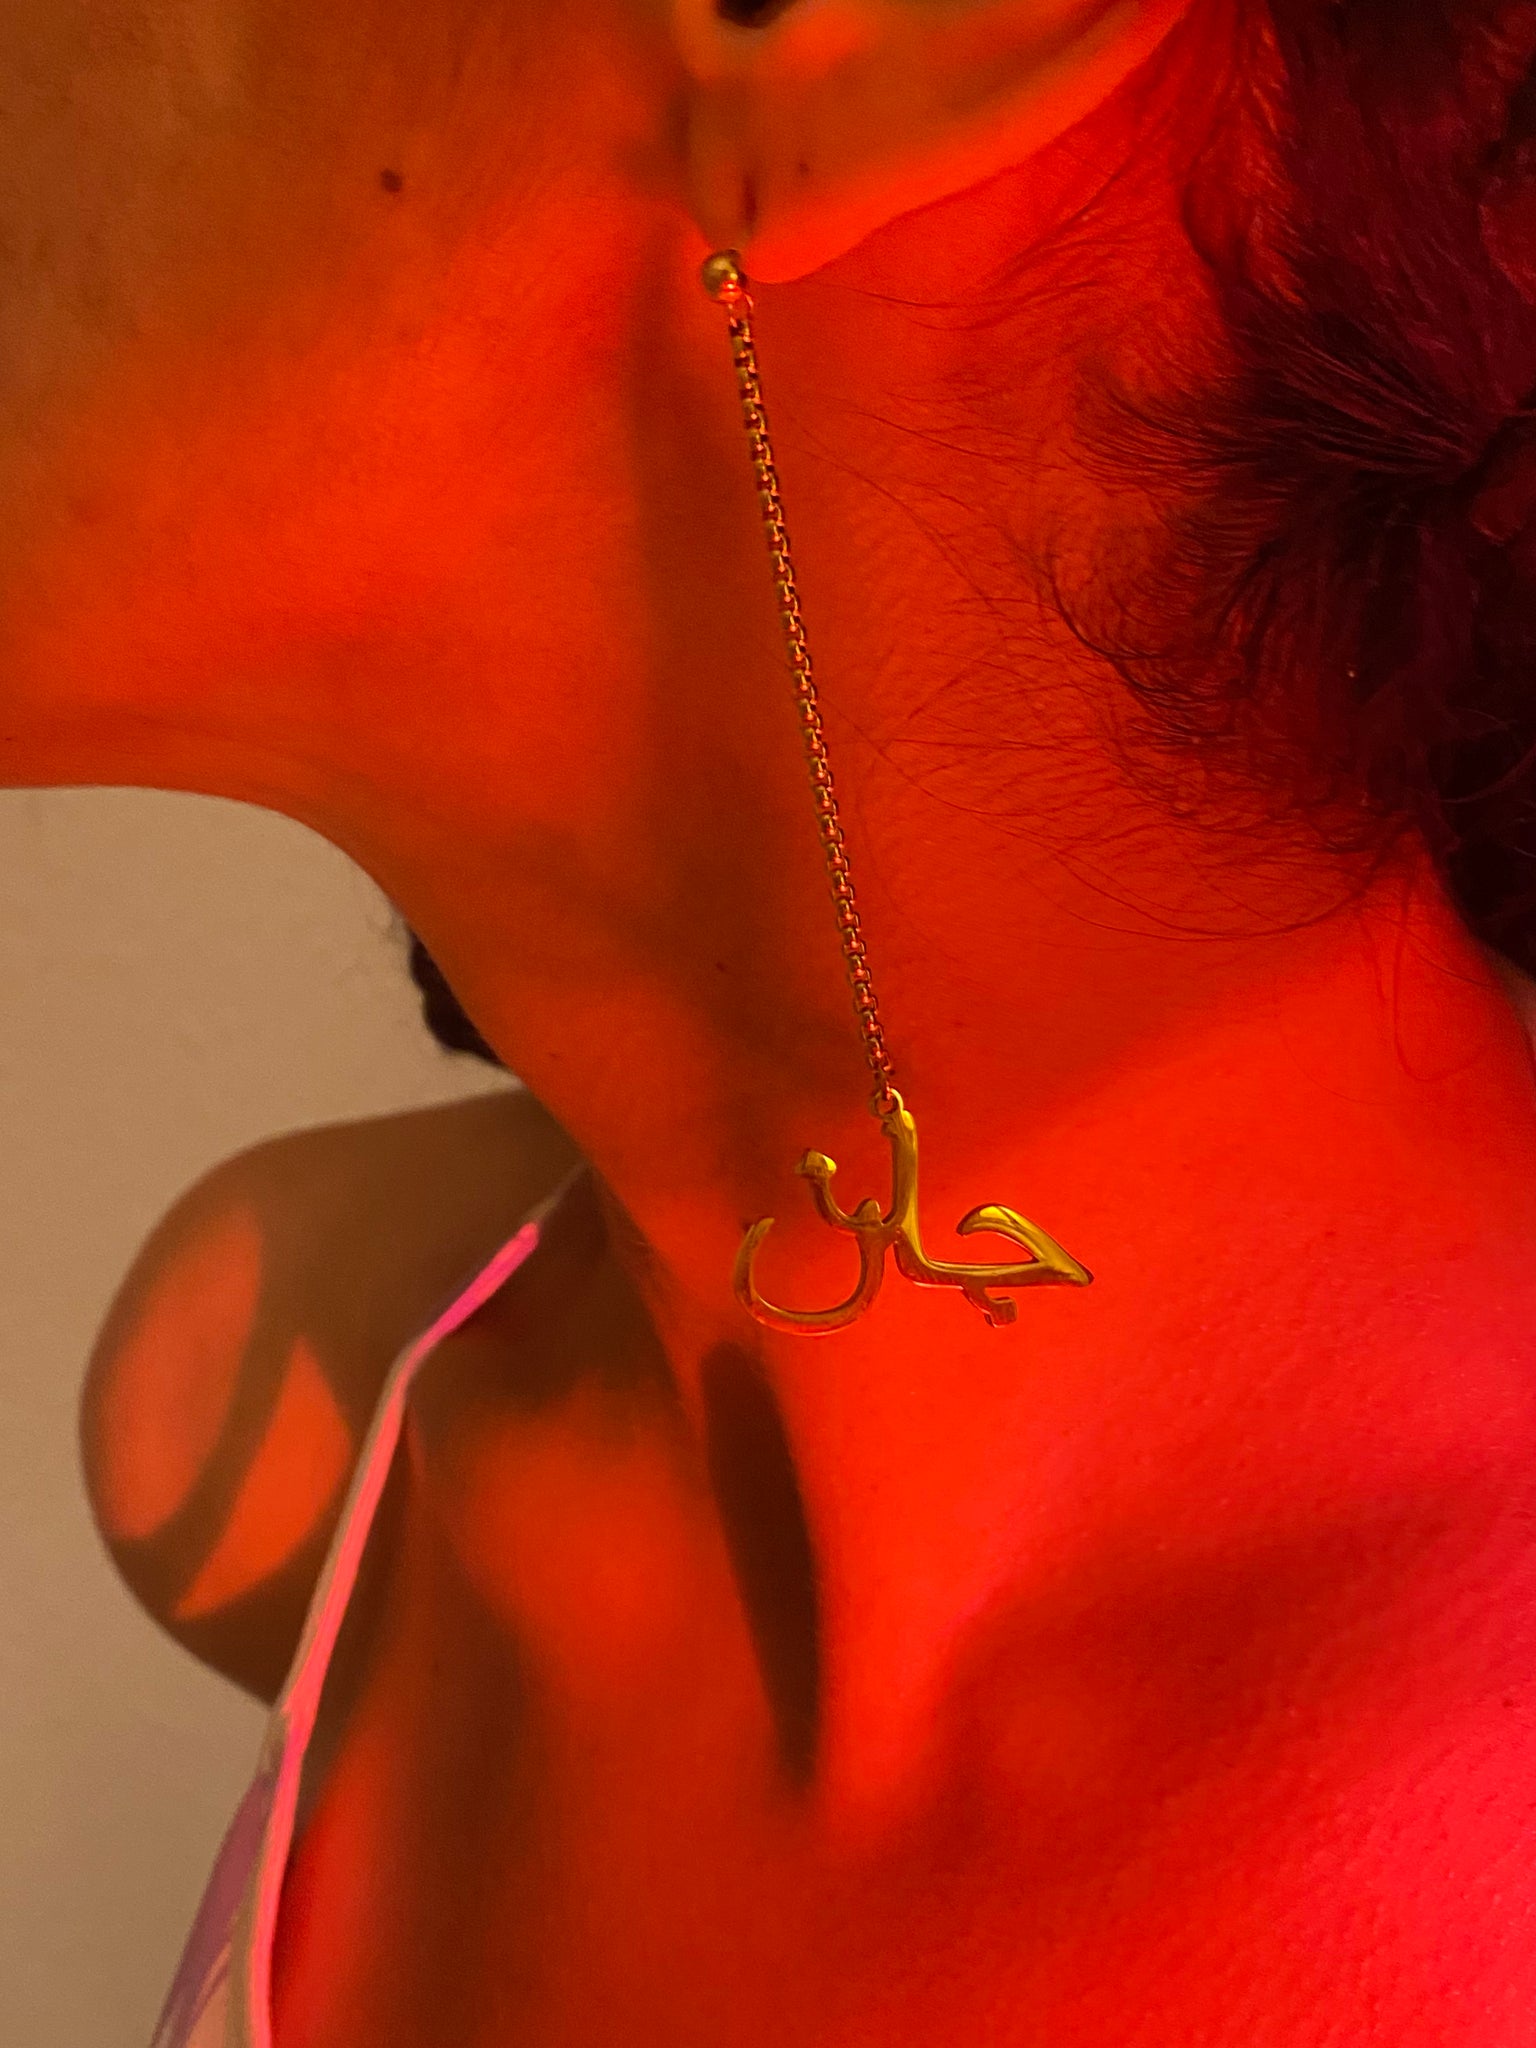 A close up of a woman's ear wearing dangly earrings with the word 'jaan' at the bottom.